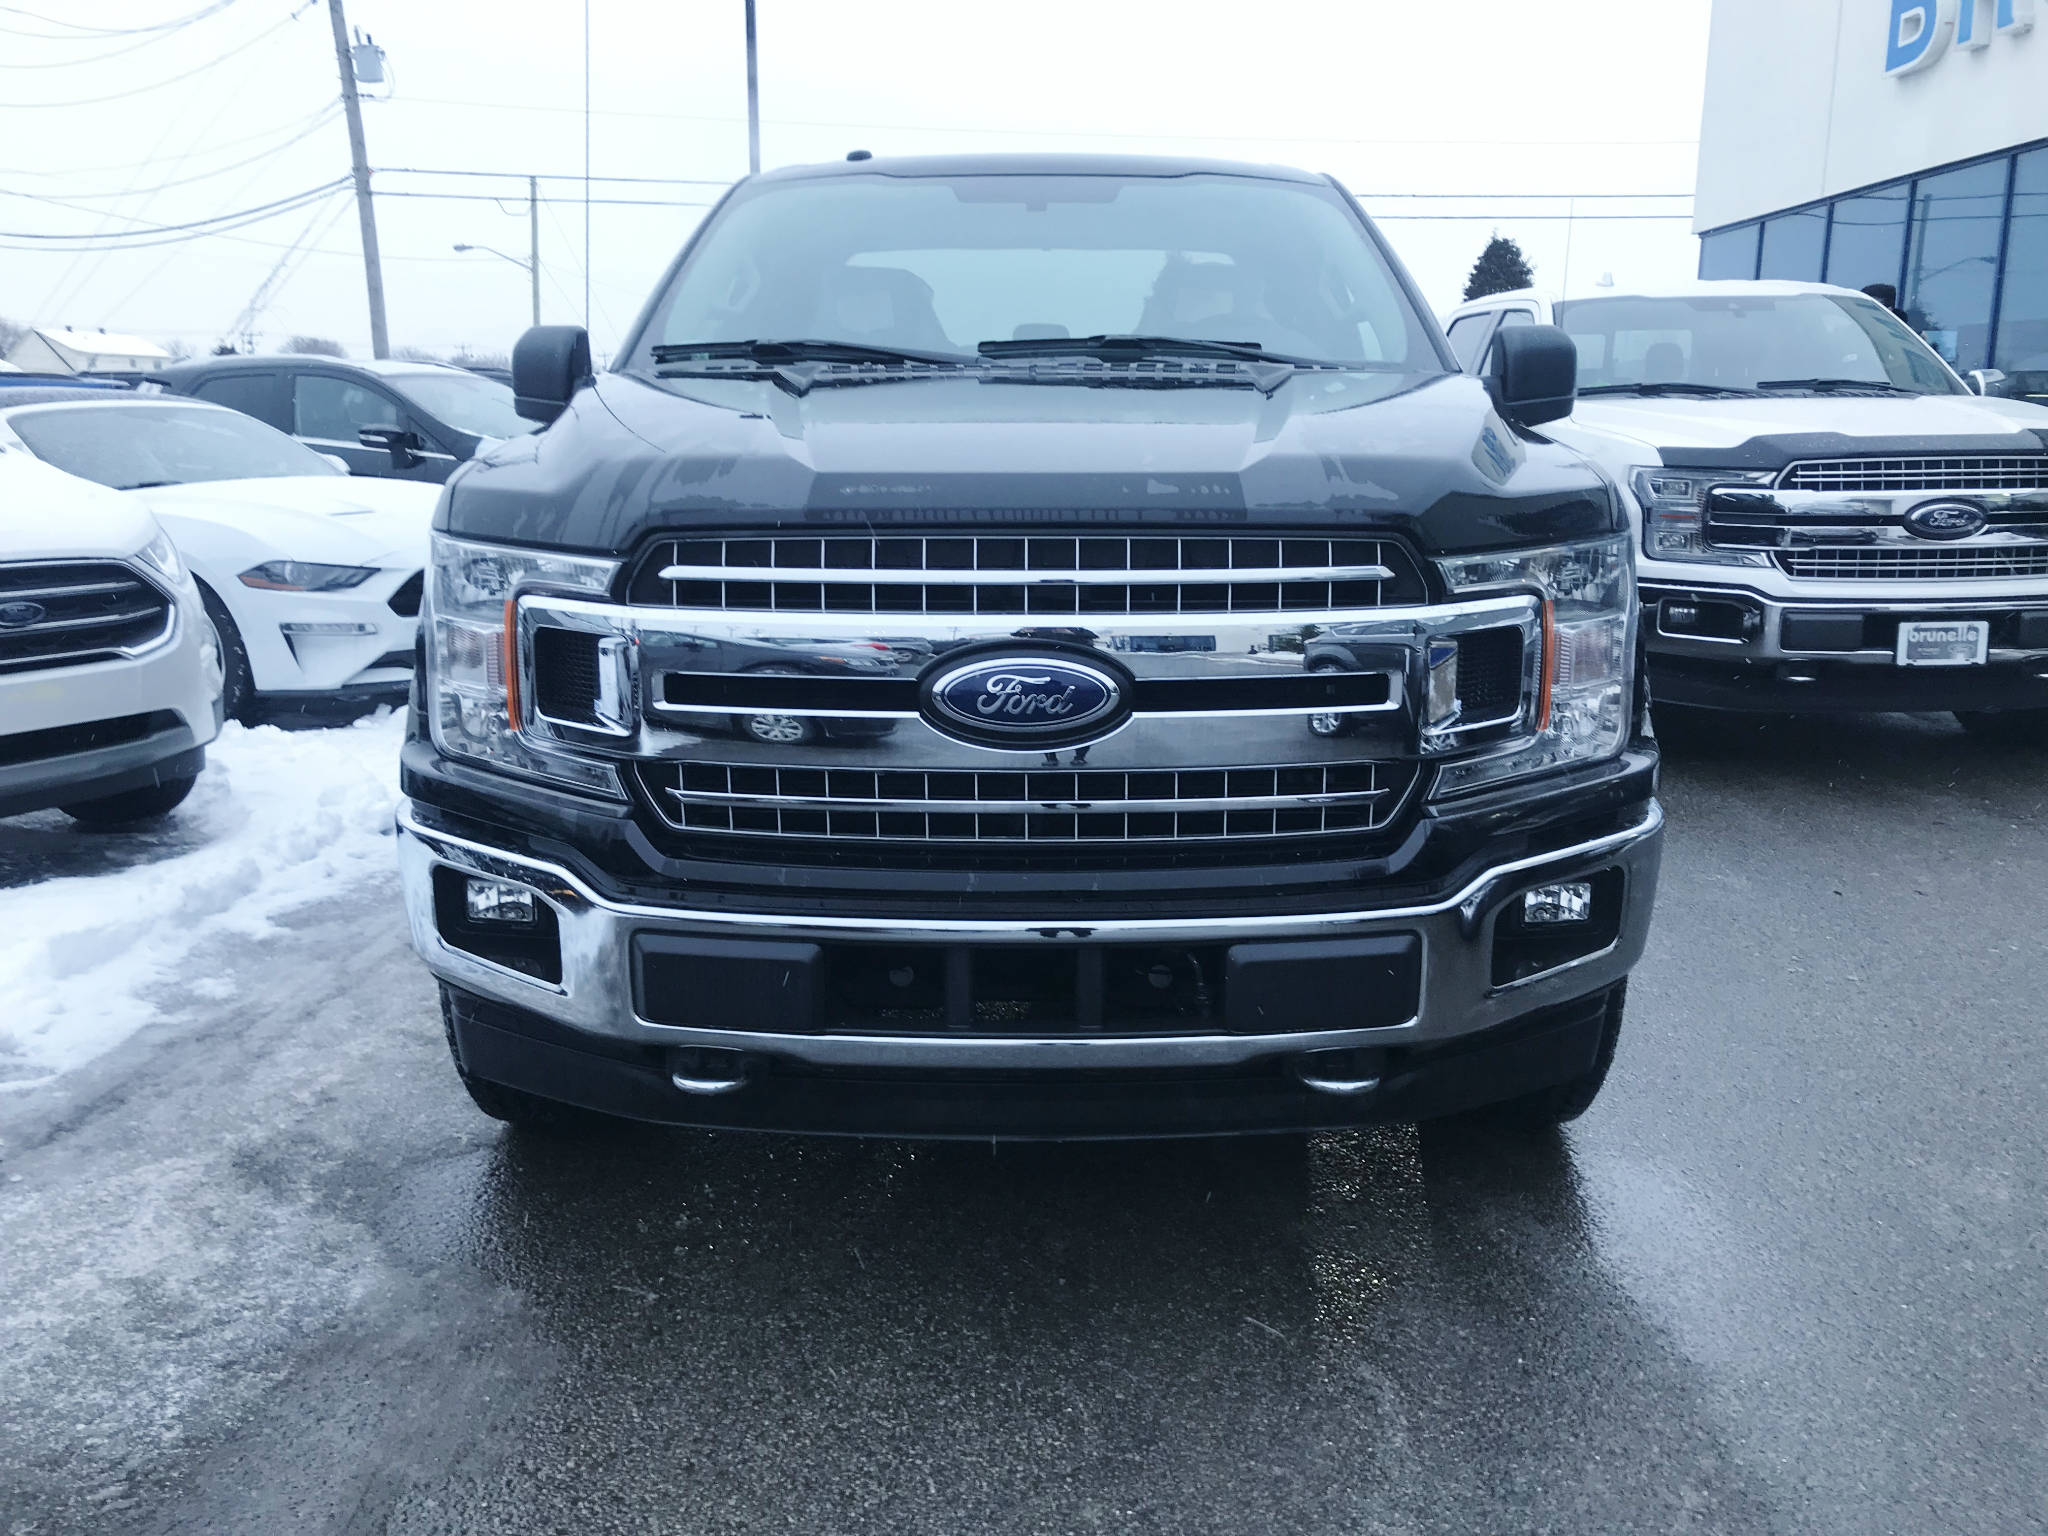  Ford F-150 XLT CABINE DOUBLE 4X4 XTR V8